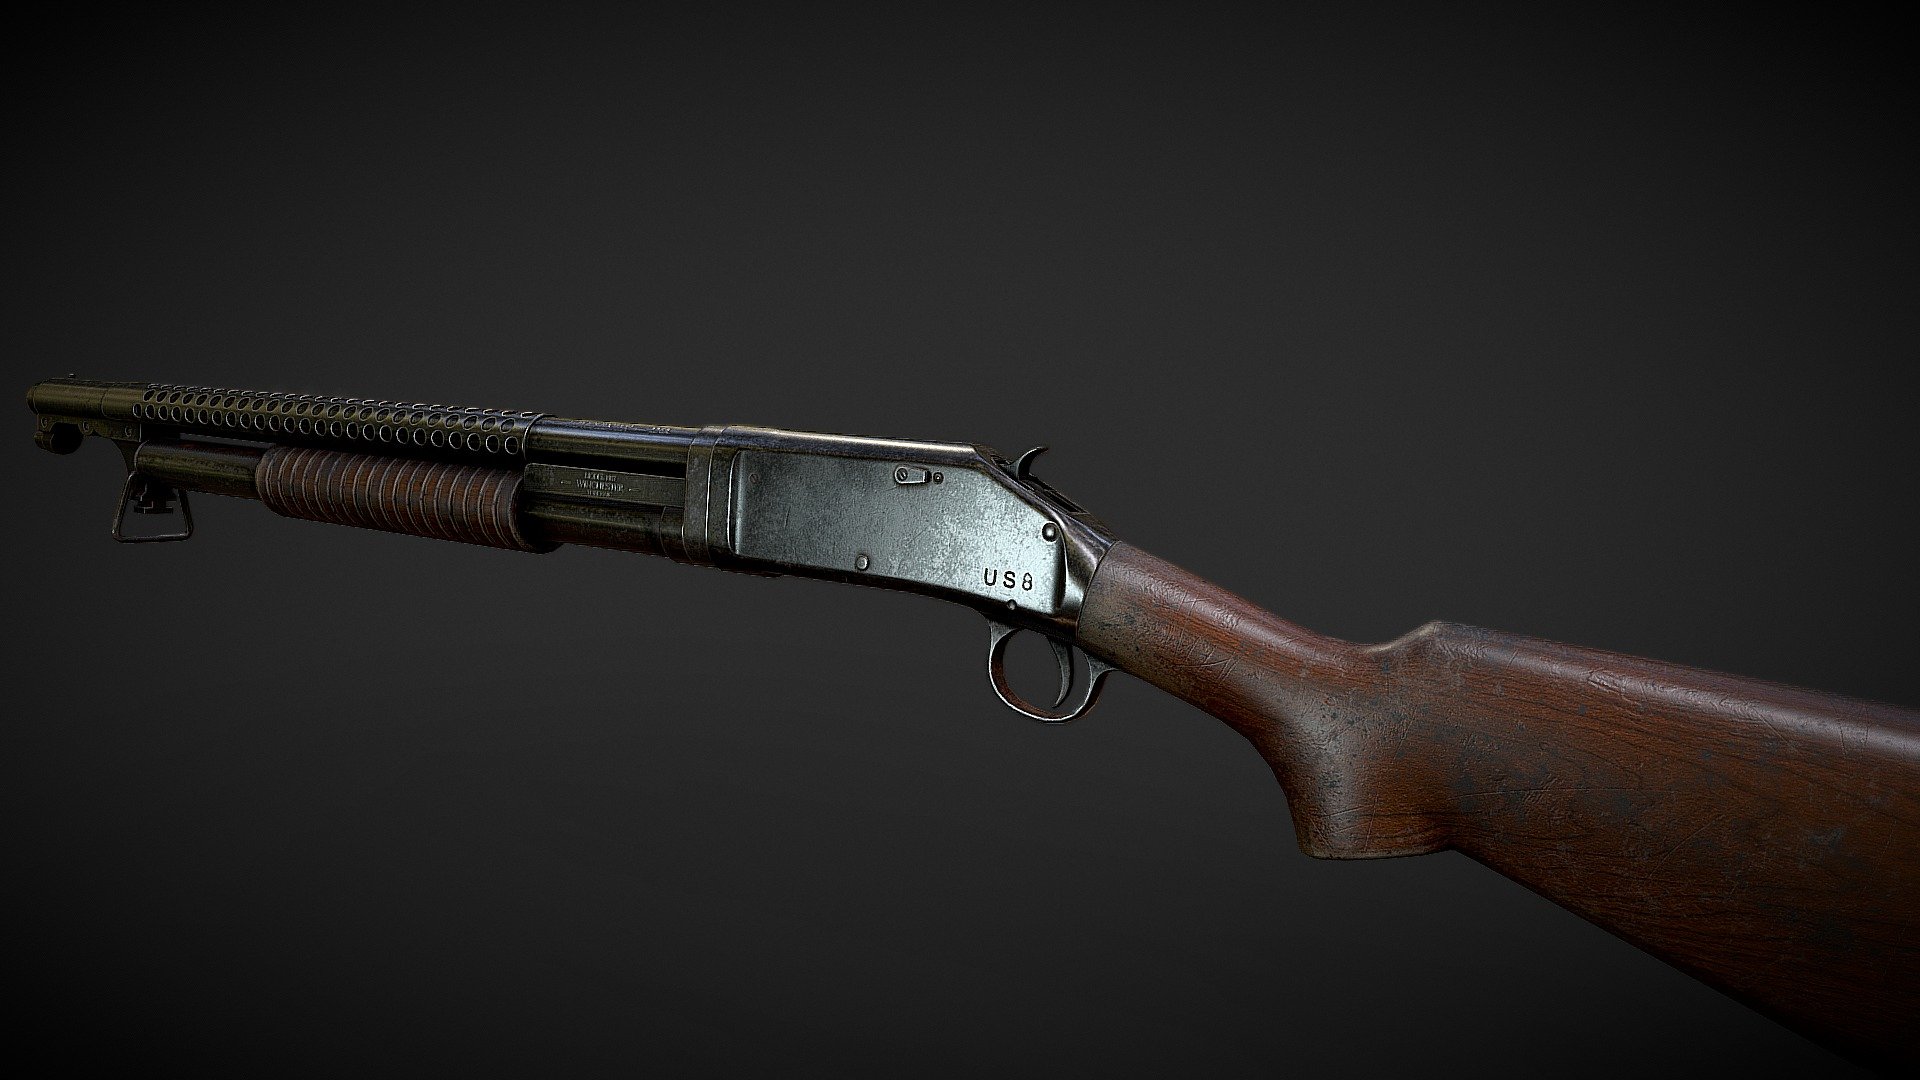 &mdash;General Information&mdash;



Lowpoly, optimized for modern game engines.



Made using real world scales



High quality 4k textures



Created to be used in a modern engine that supports physically based rendering (PBR) comes with textures optimized for Unreal Engine 4 and Unity 5.



-Detailed Model Specifications-

Weapon and Magazine contains 17 separate objects and are ready to be rigged. the objects are:




Receiver




TriggerGuard




WoodStock




SlideGuard




Hammer




Barrel




ActionSlide




ShellGuide




LugHeadShell




Front sight




BreechBolt




Trigger




Ring




Magazine




Bullet




BarrelGuard




Carrier



Geometry :

Polygon : 12110

Vertices : 11276

-Texture Information-

All 4k Texture (All textures are in .tga format)

Includes 2 versions: no scratches and scratches with dust

https://www.artstation.com/subzero191 - WINCHESTER 1897 - Buy Royalty Free 3D model by GameWeapons 3d model